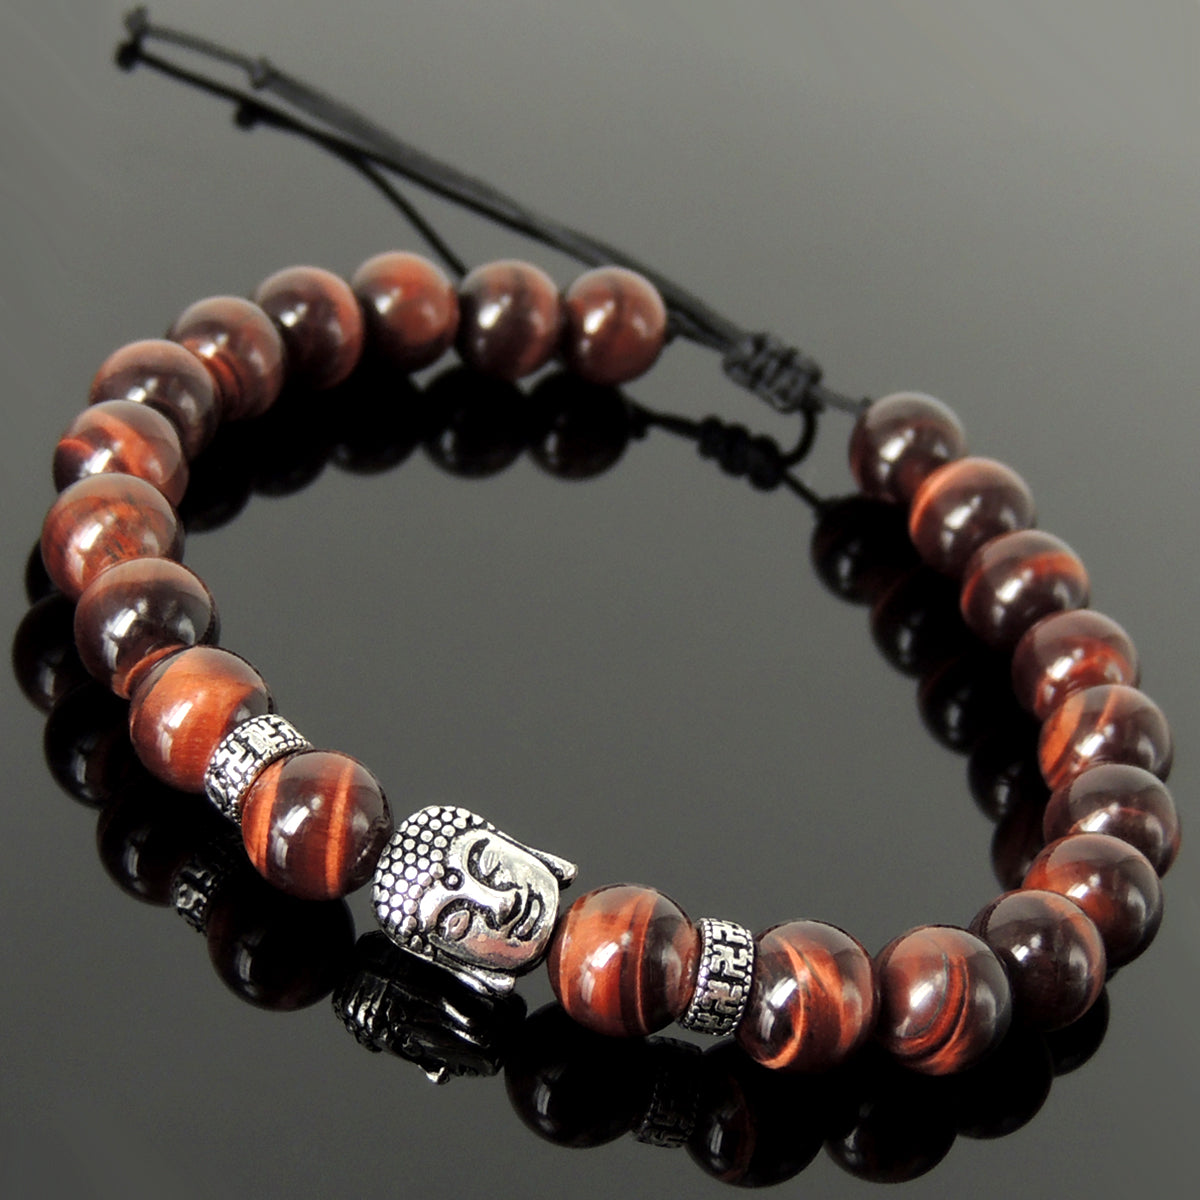 Healing Buddhism Jewelry Handmade Braided Gemstone Bracelet - Mens Womens Casual Wear, Meditation with Red Tiger Eye Adjustable Drawstring, S925 Sterling Silver Beads BR1696